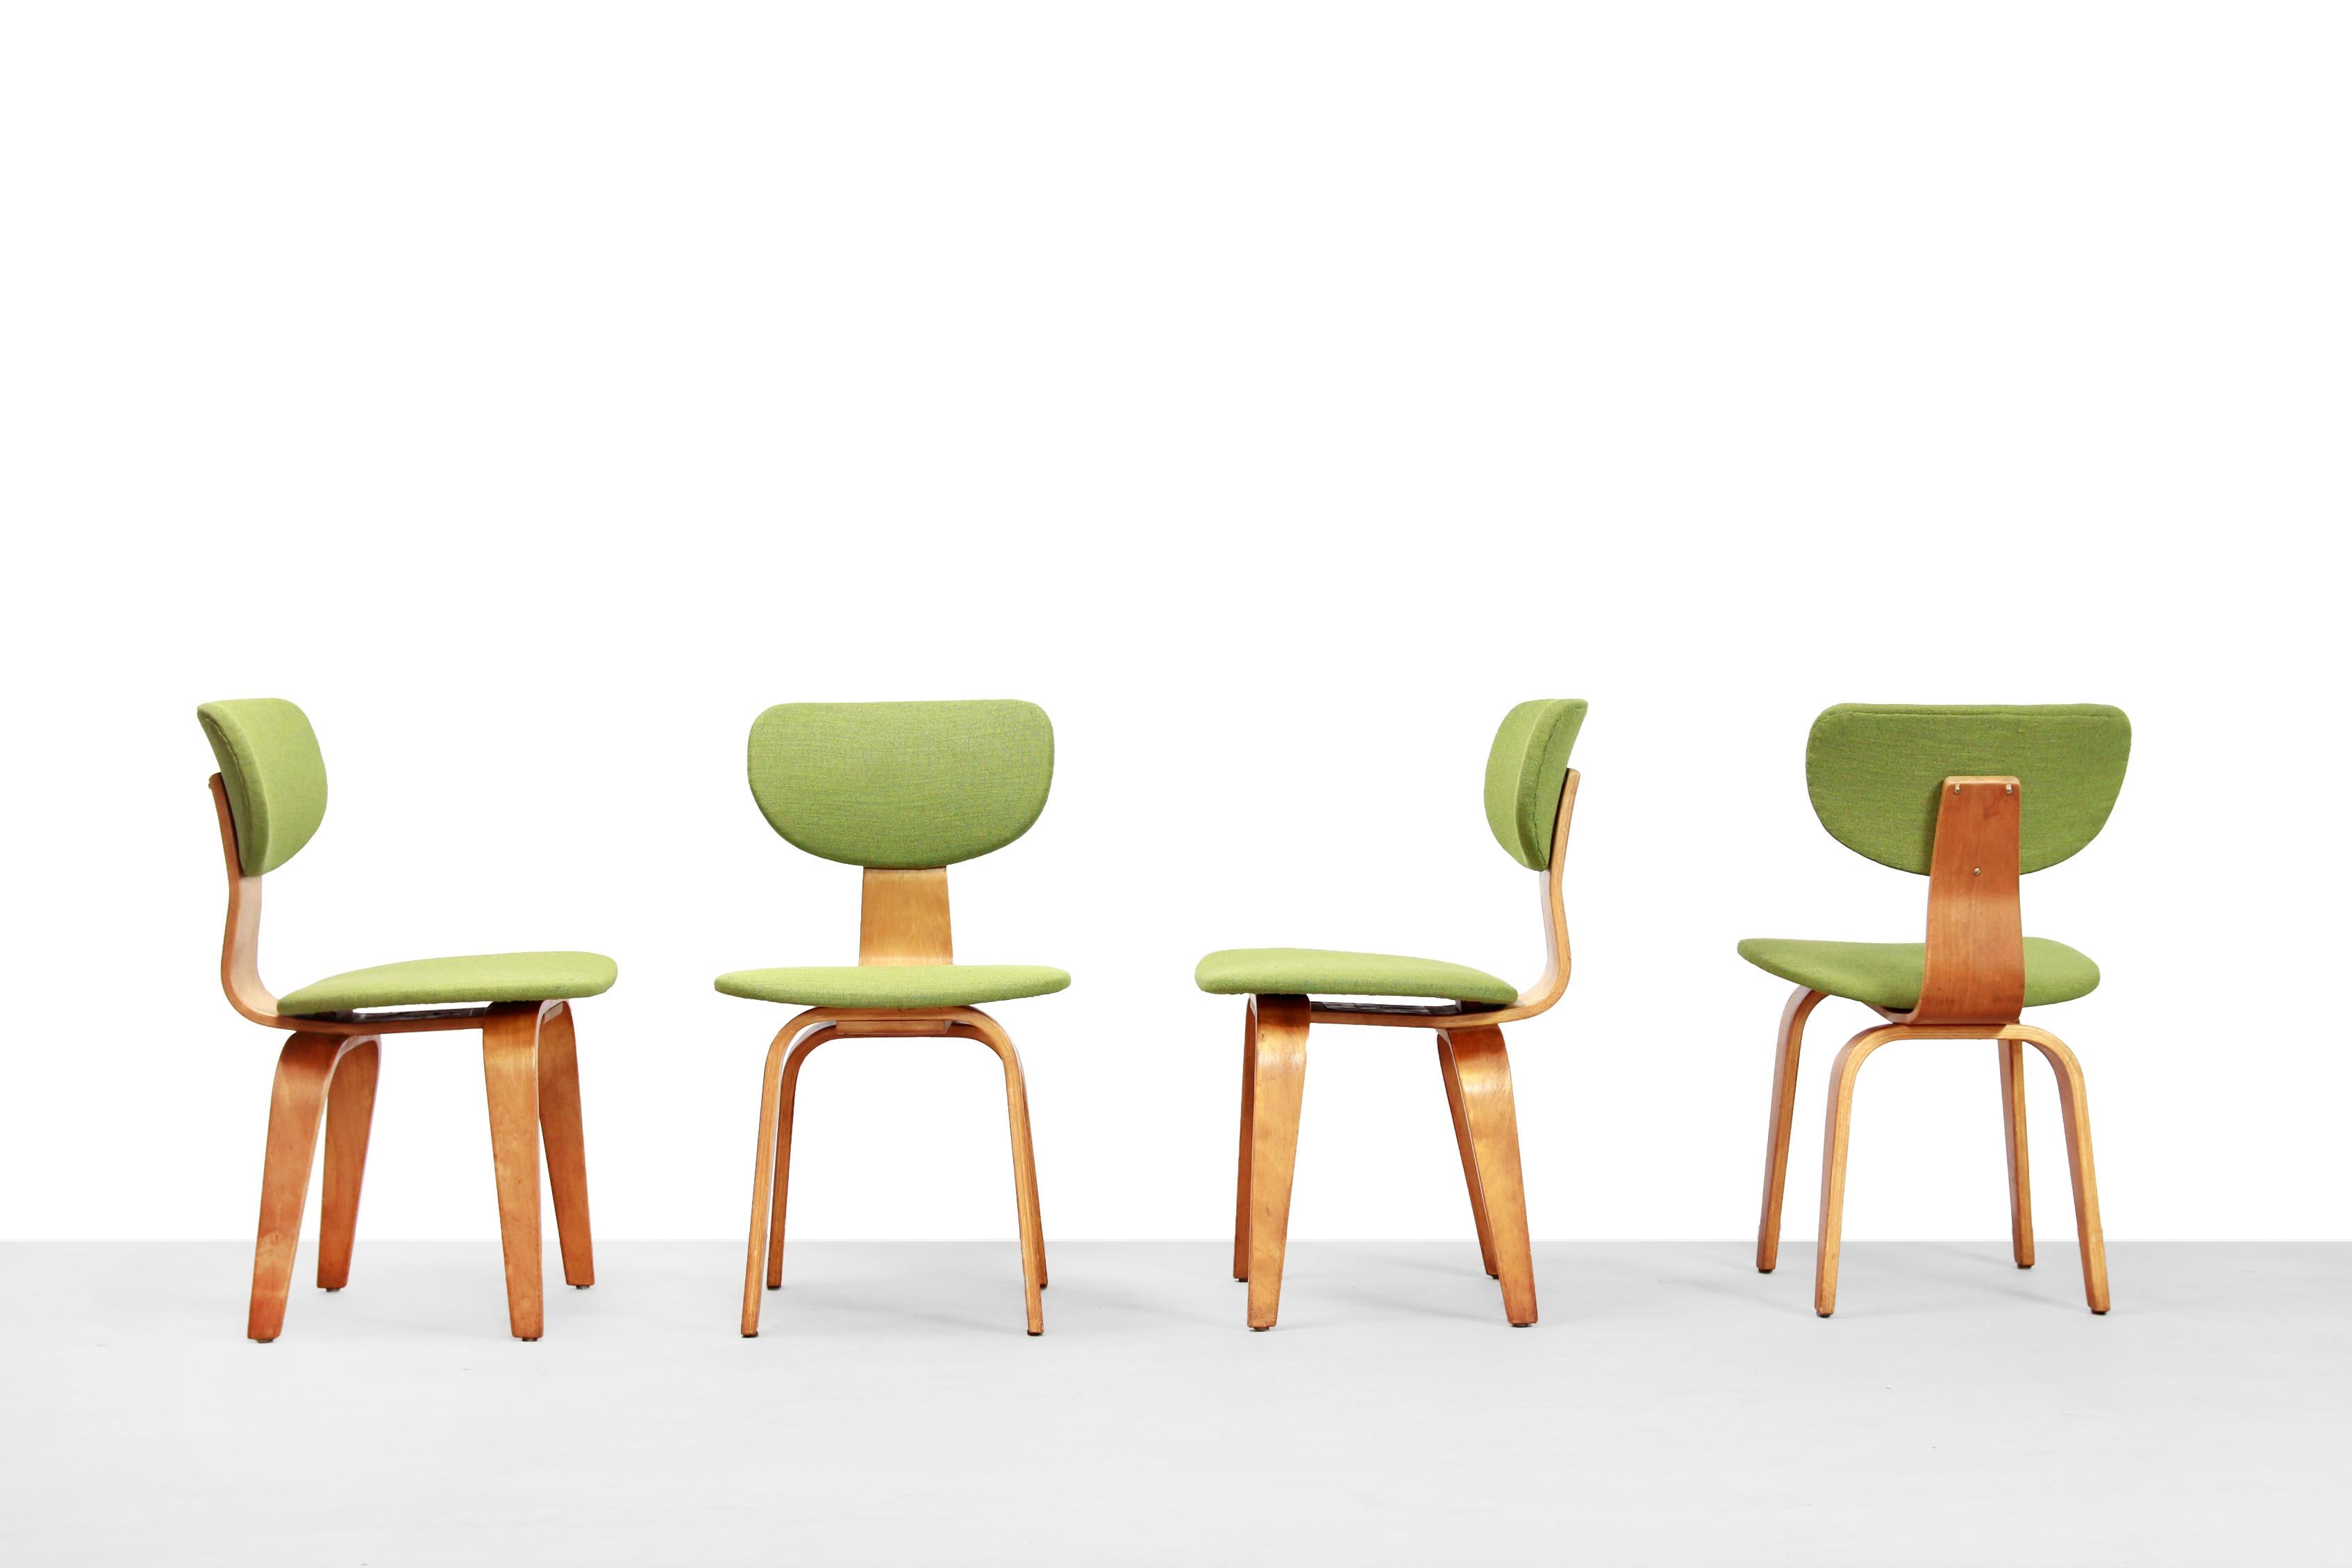 A set of very beautiful and rare model SB03 chairs designed by Cees Braakman for Pastoe. These dining room chairs are hard to find today, especially as a complete set. These chairs are clearly inspired by the Charles Eames LCW chairs, but that's not